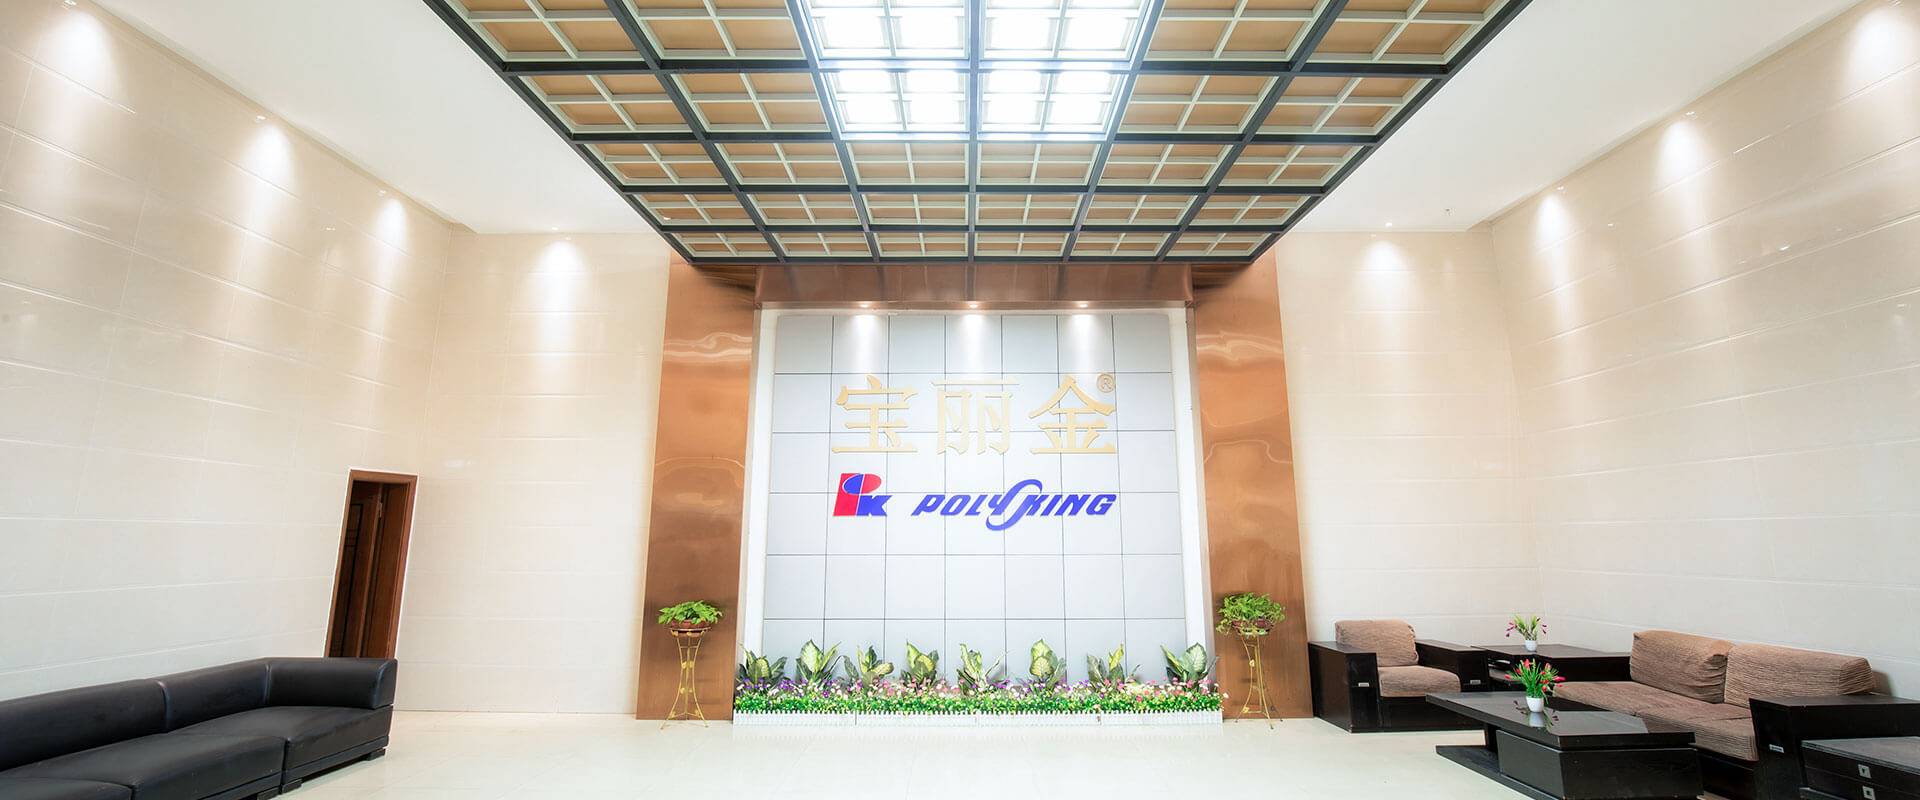 A bright conference room of Polyking bag manufacturer.